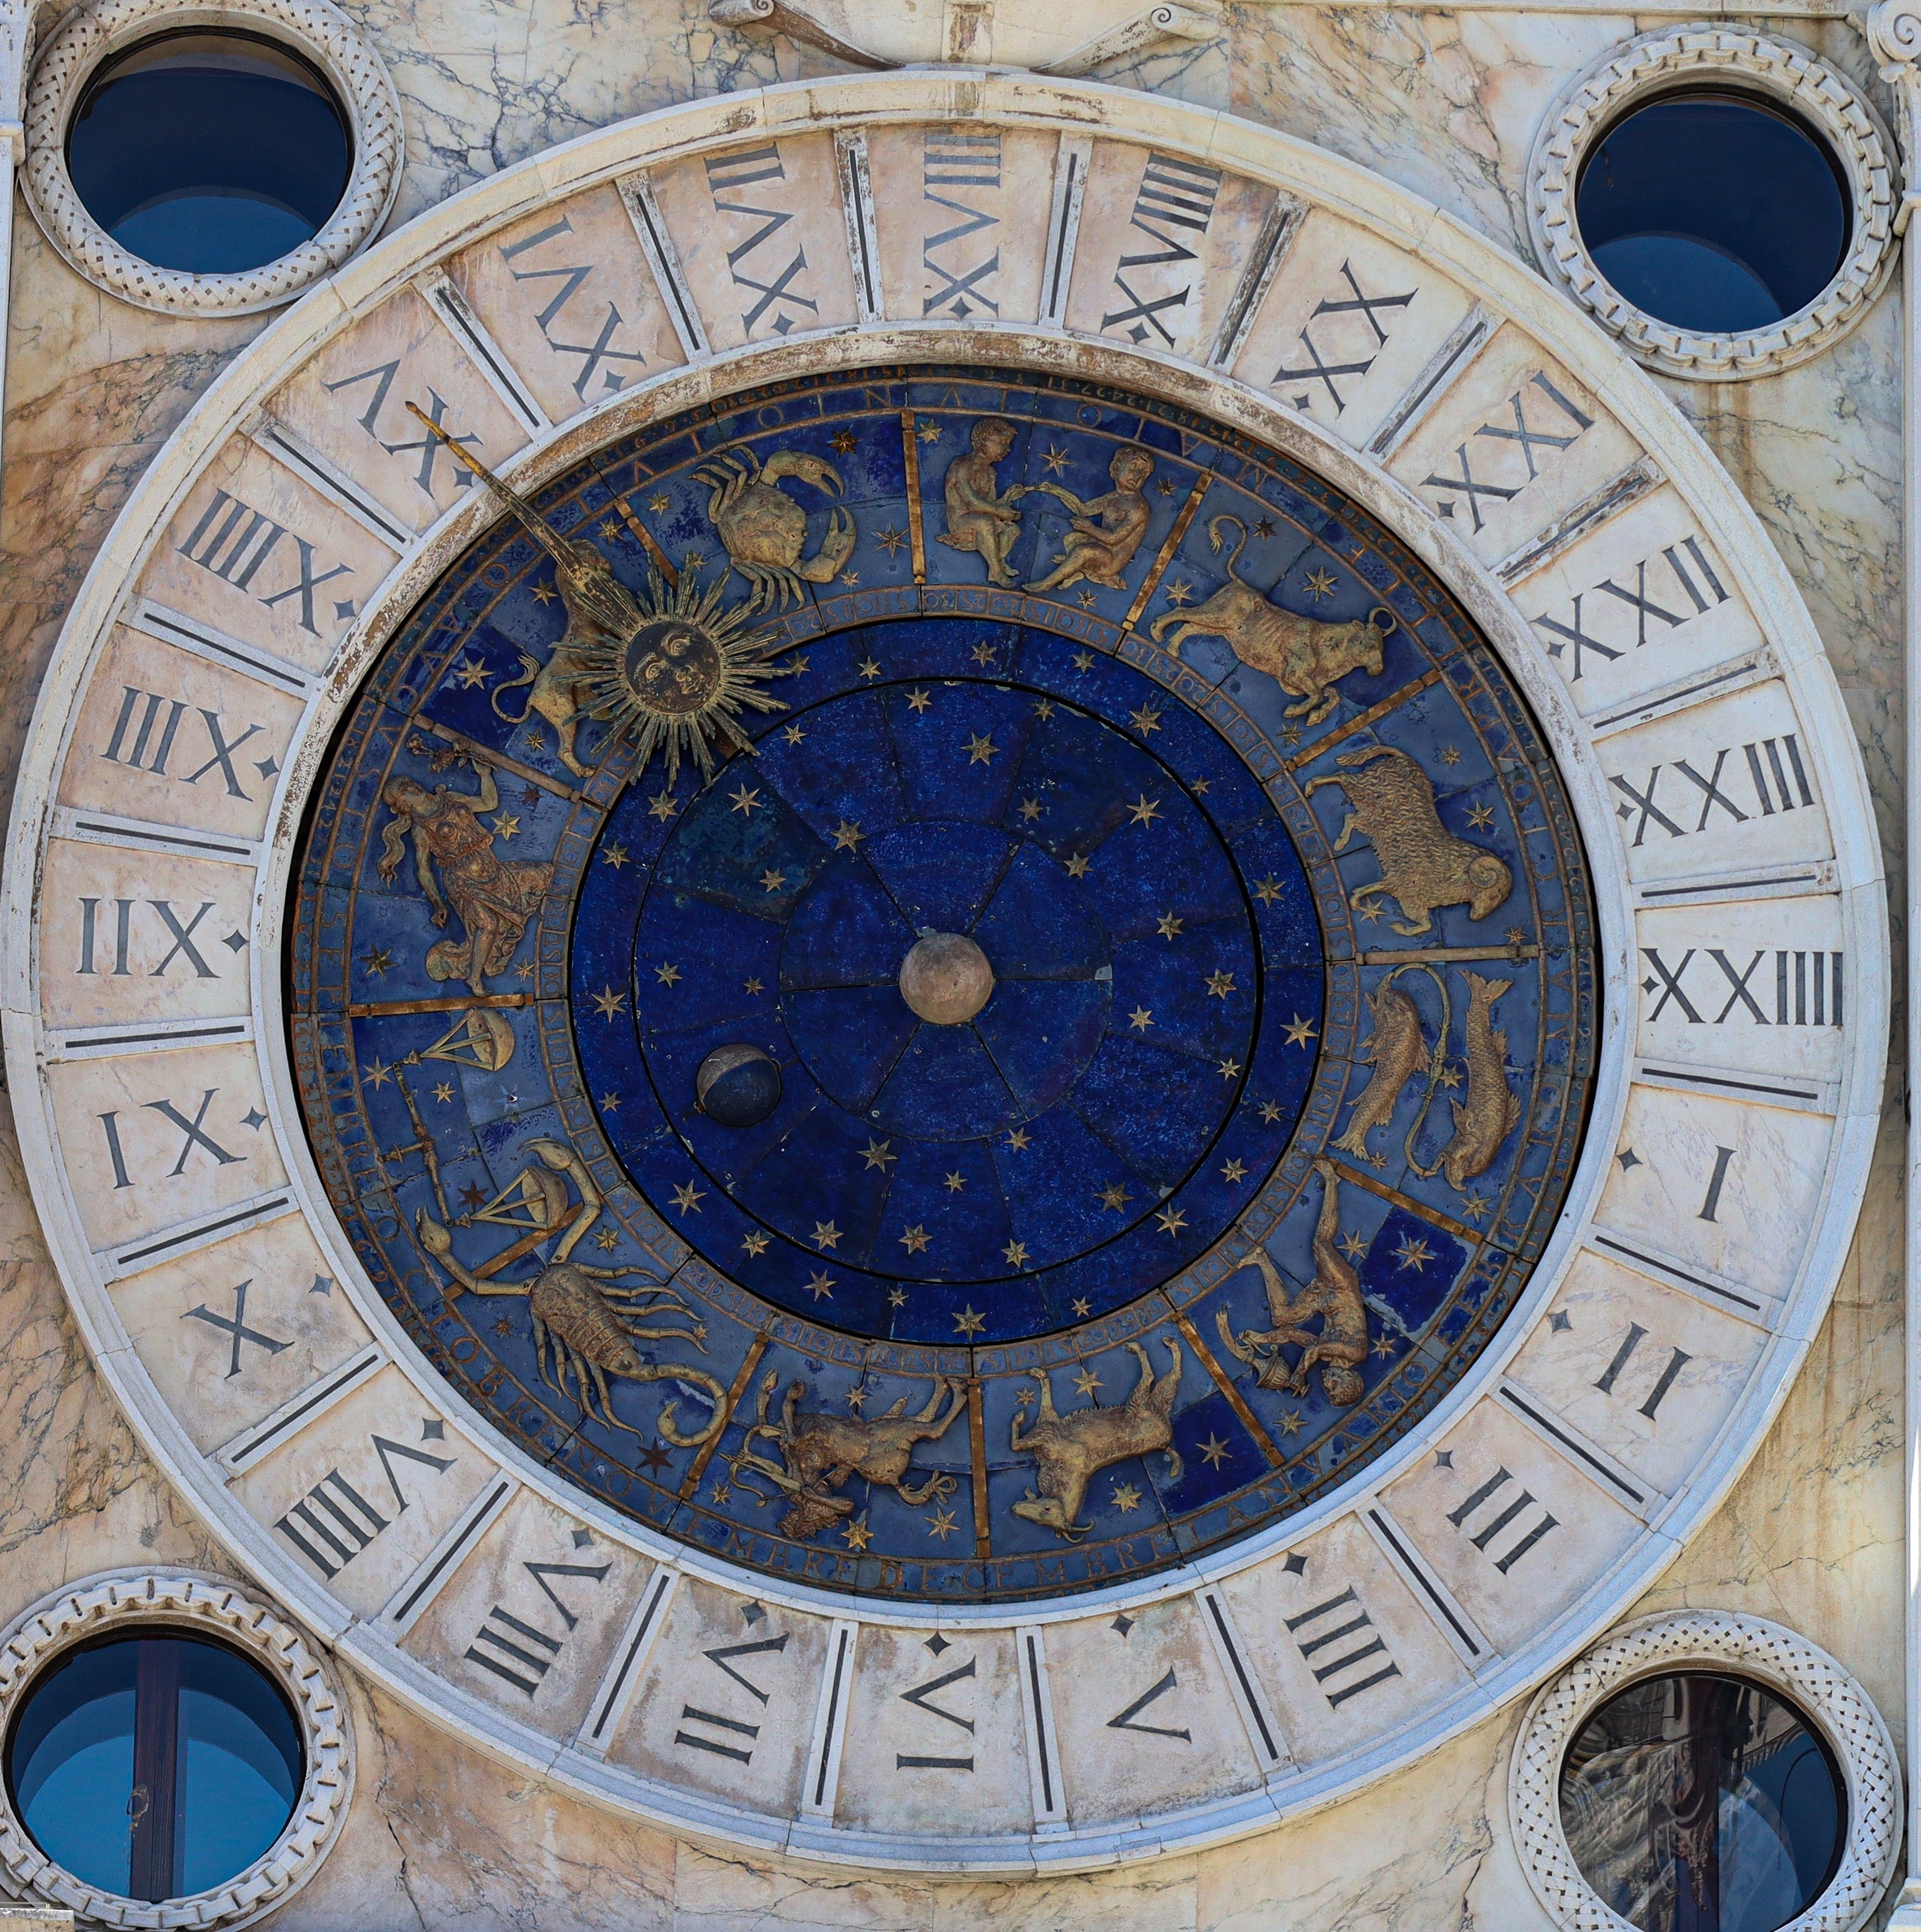 Detail of Saint Mark Square old Clocktower with zodiac signs, planets and stars (15th century). | Source: Pexels